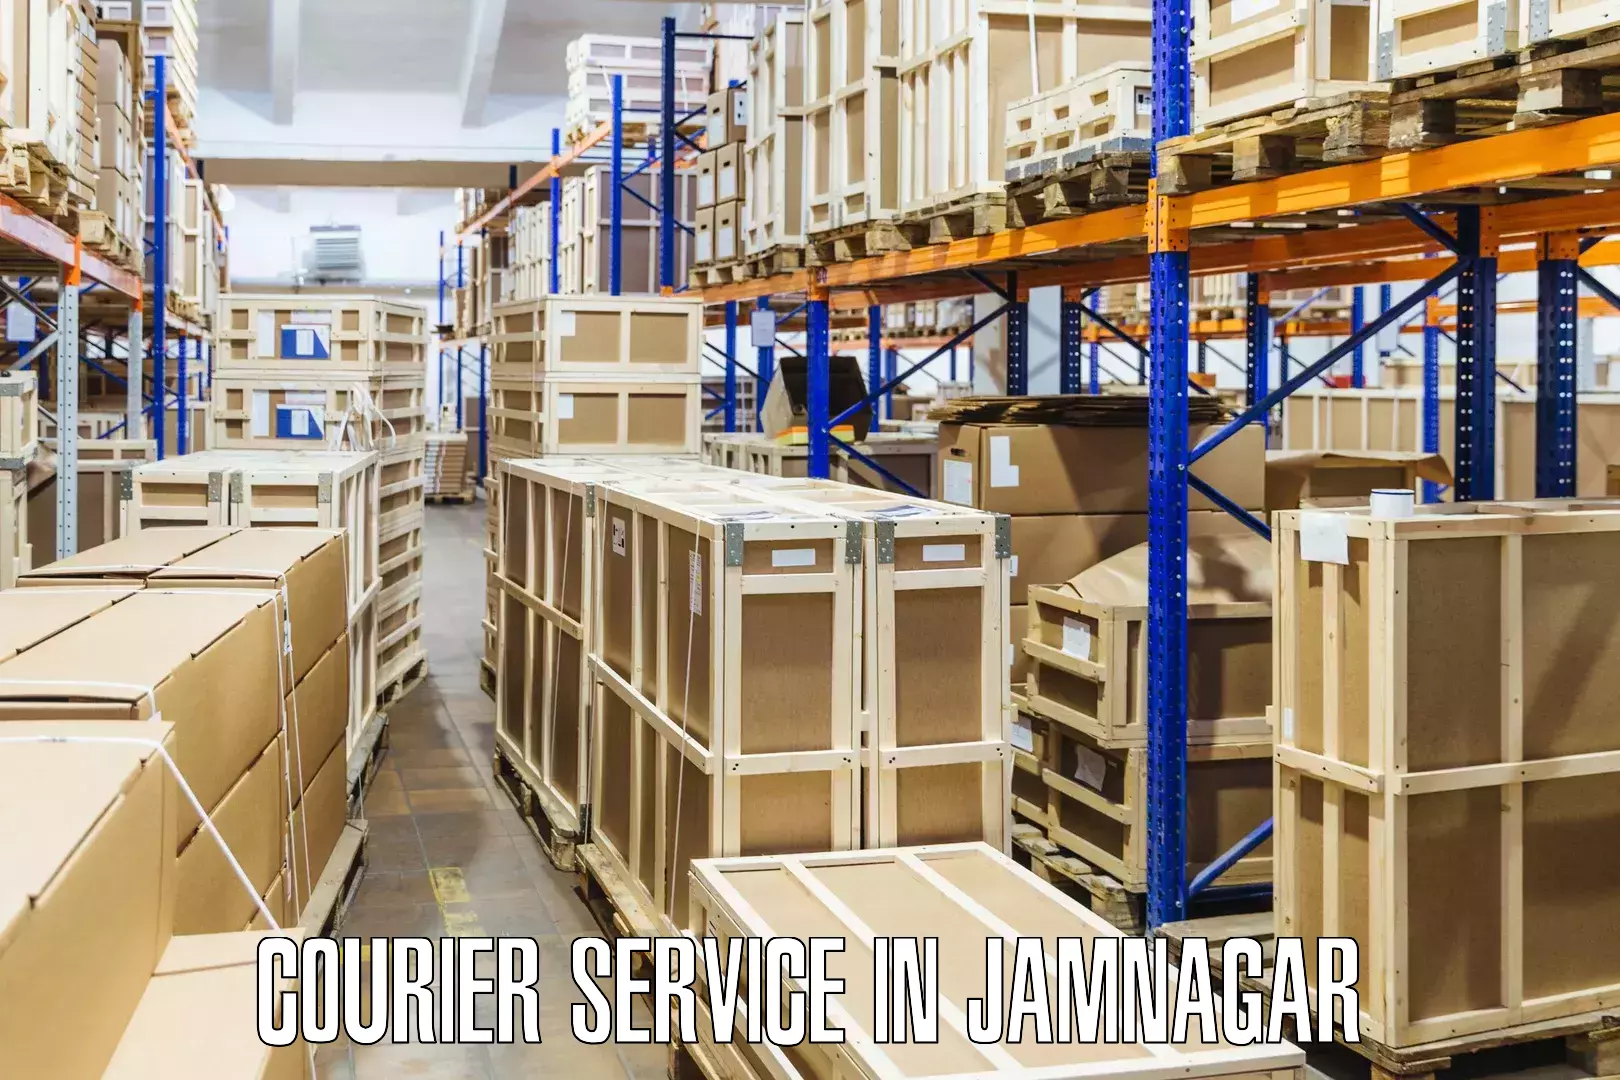 Tailored shipping services in Jamnagar